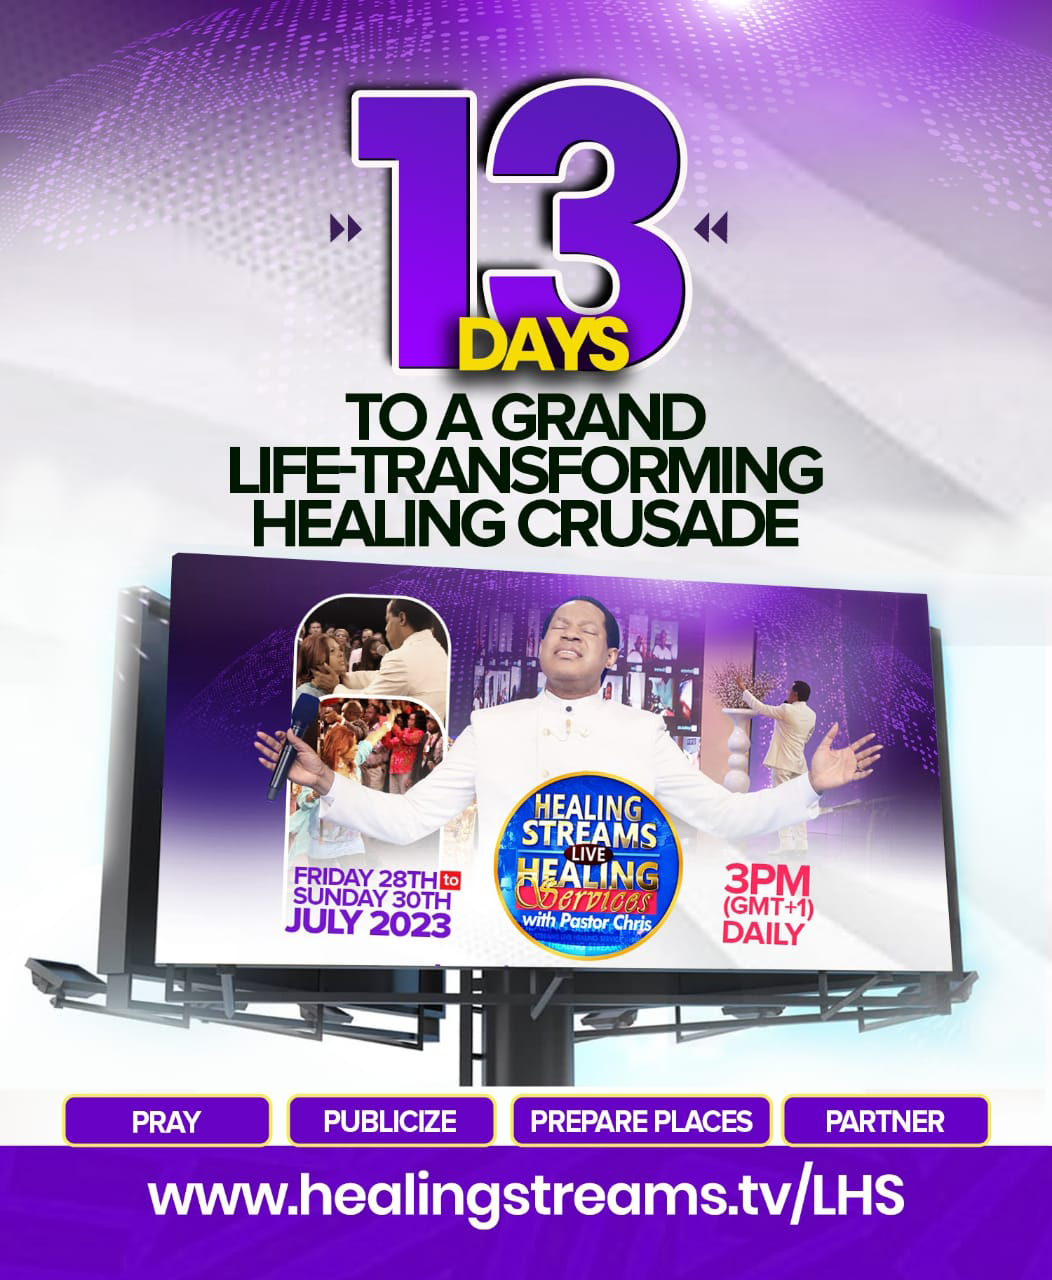 IT'S 13 DAYS TO A GRAND LIFE-TRANSFORMING HEALING CRUSADE